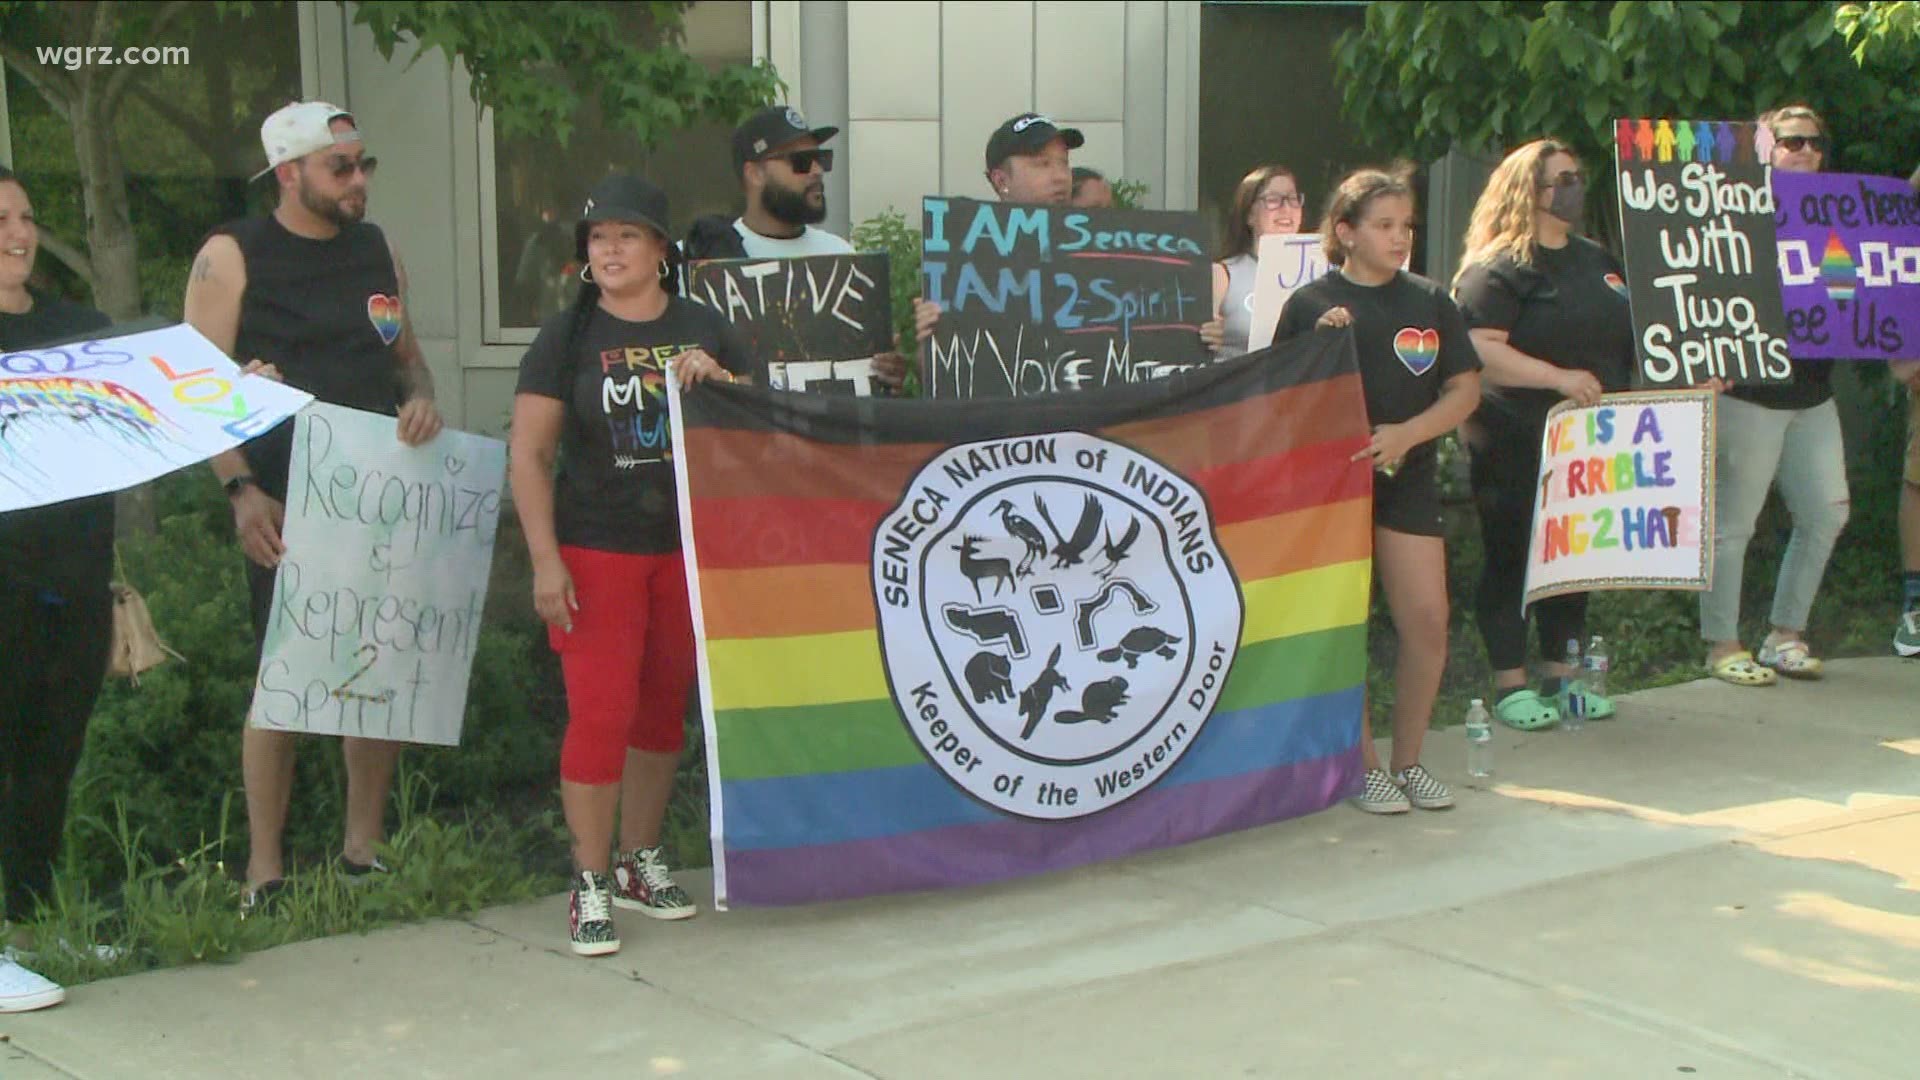 Organizers say they have been trying to convince the Seneca Nation Counsel to fly their pride flag for nearly 2 years.